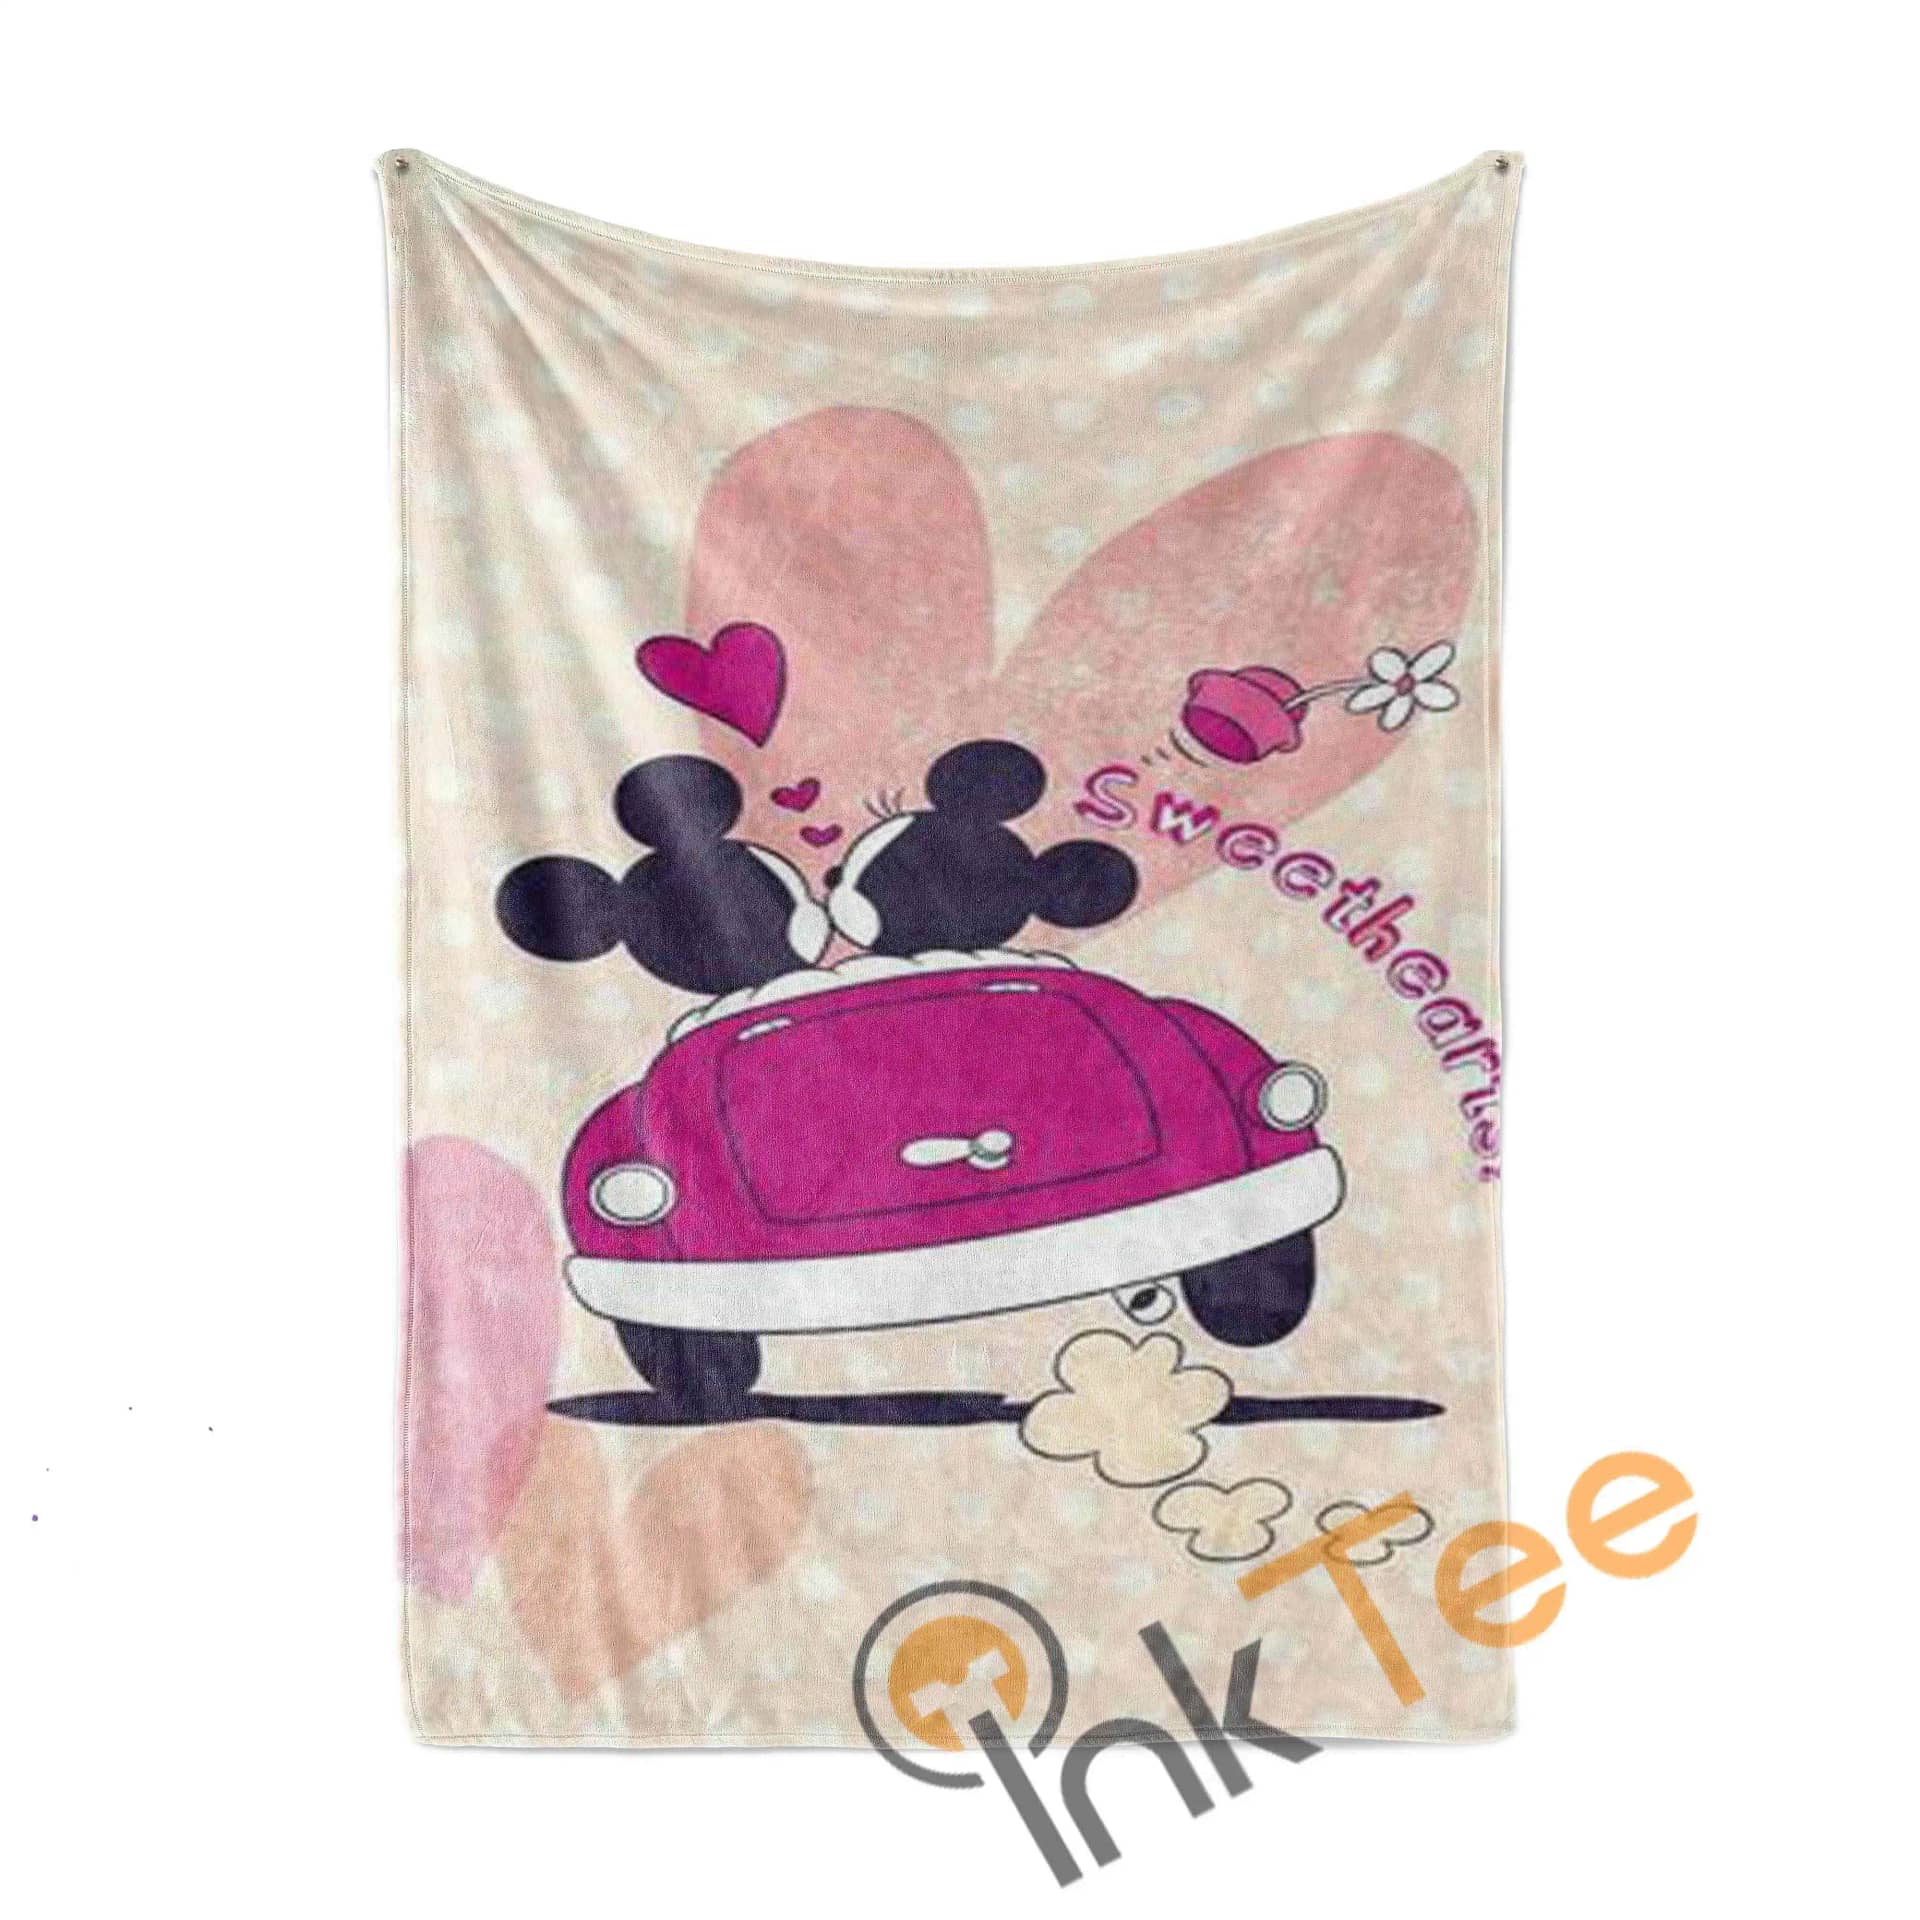 Sweet Heart Minnie And Mickey Mouse Limited Edition Area Amazon Best Seller 4108 Fleece Blanket